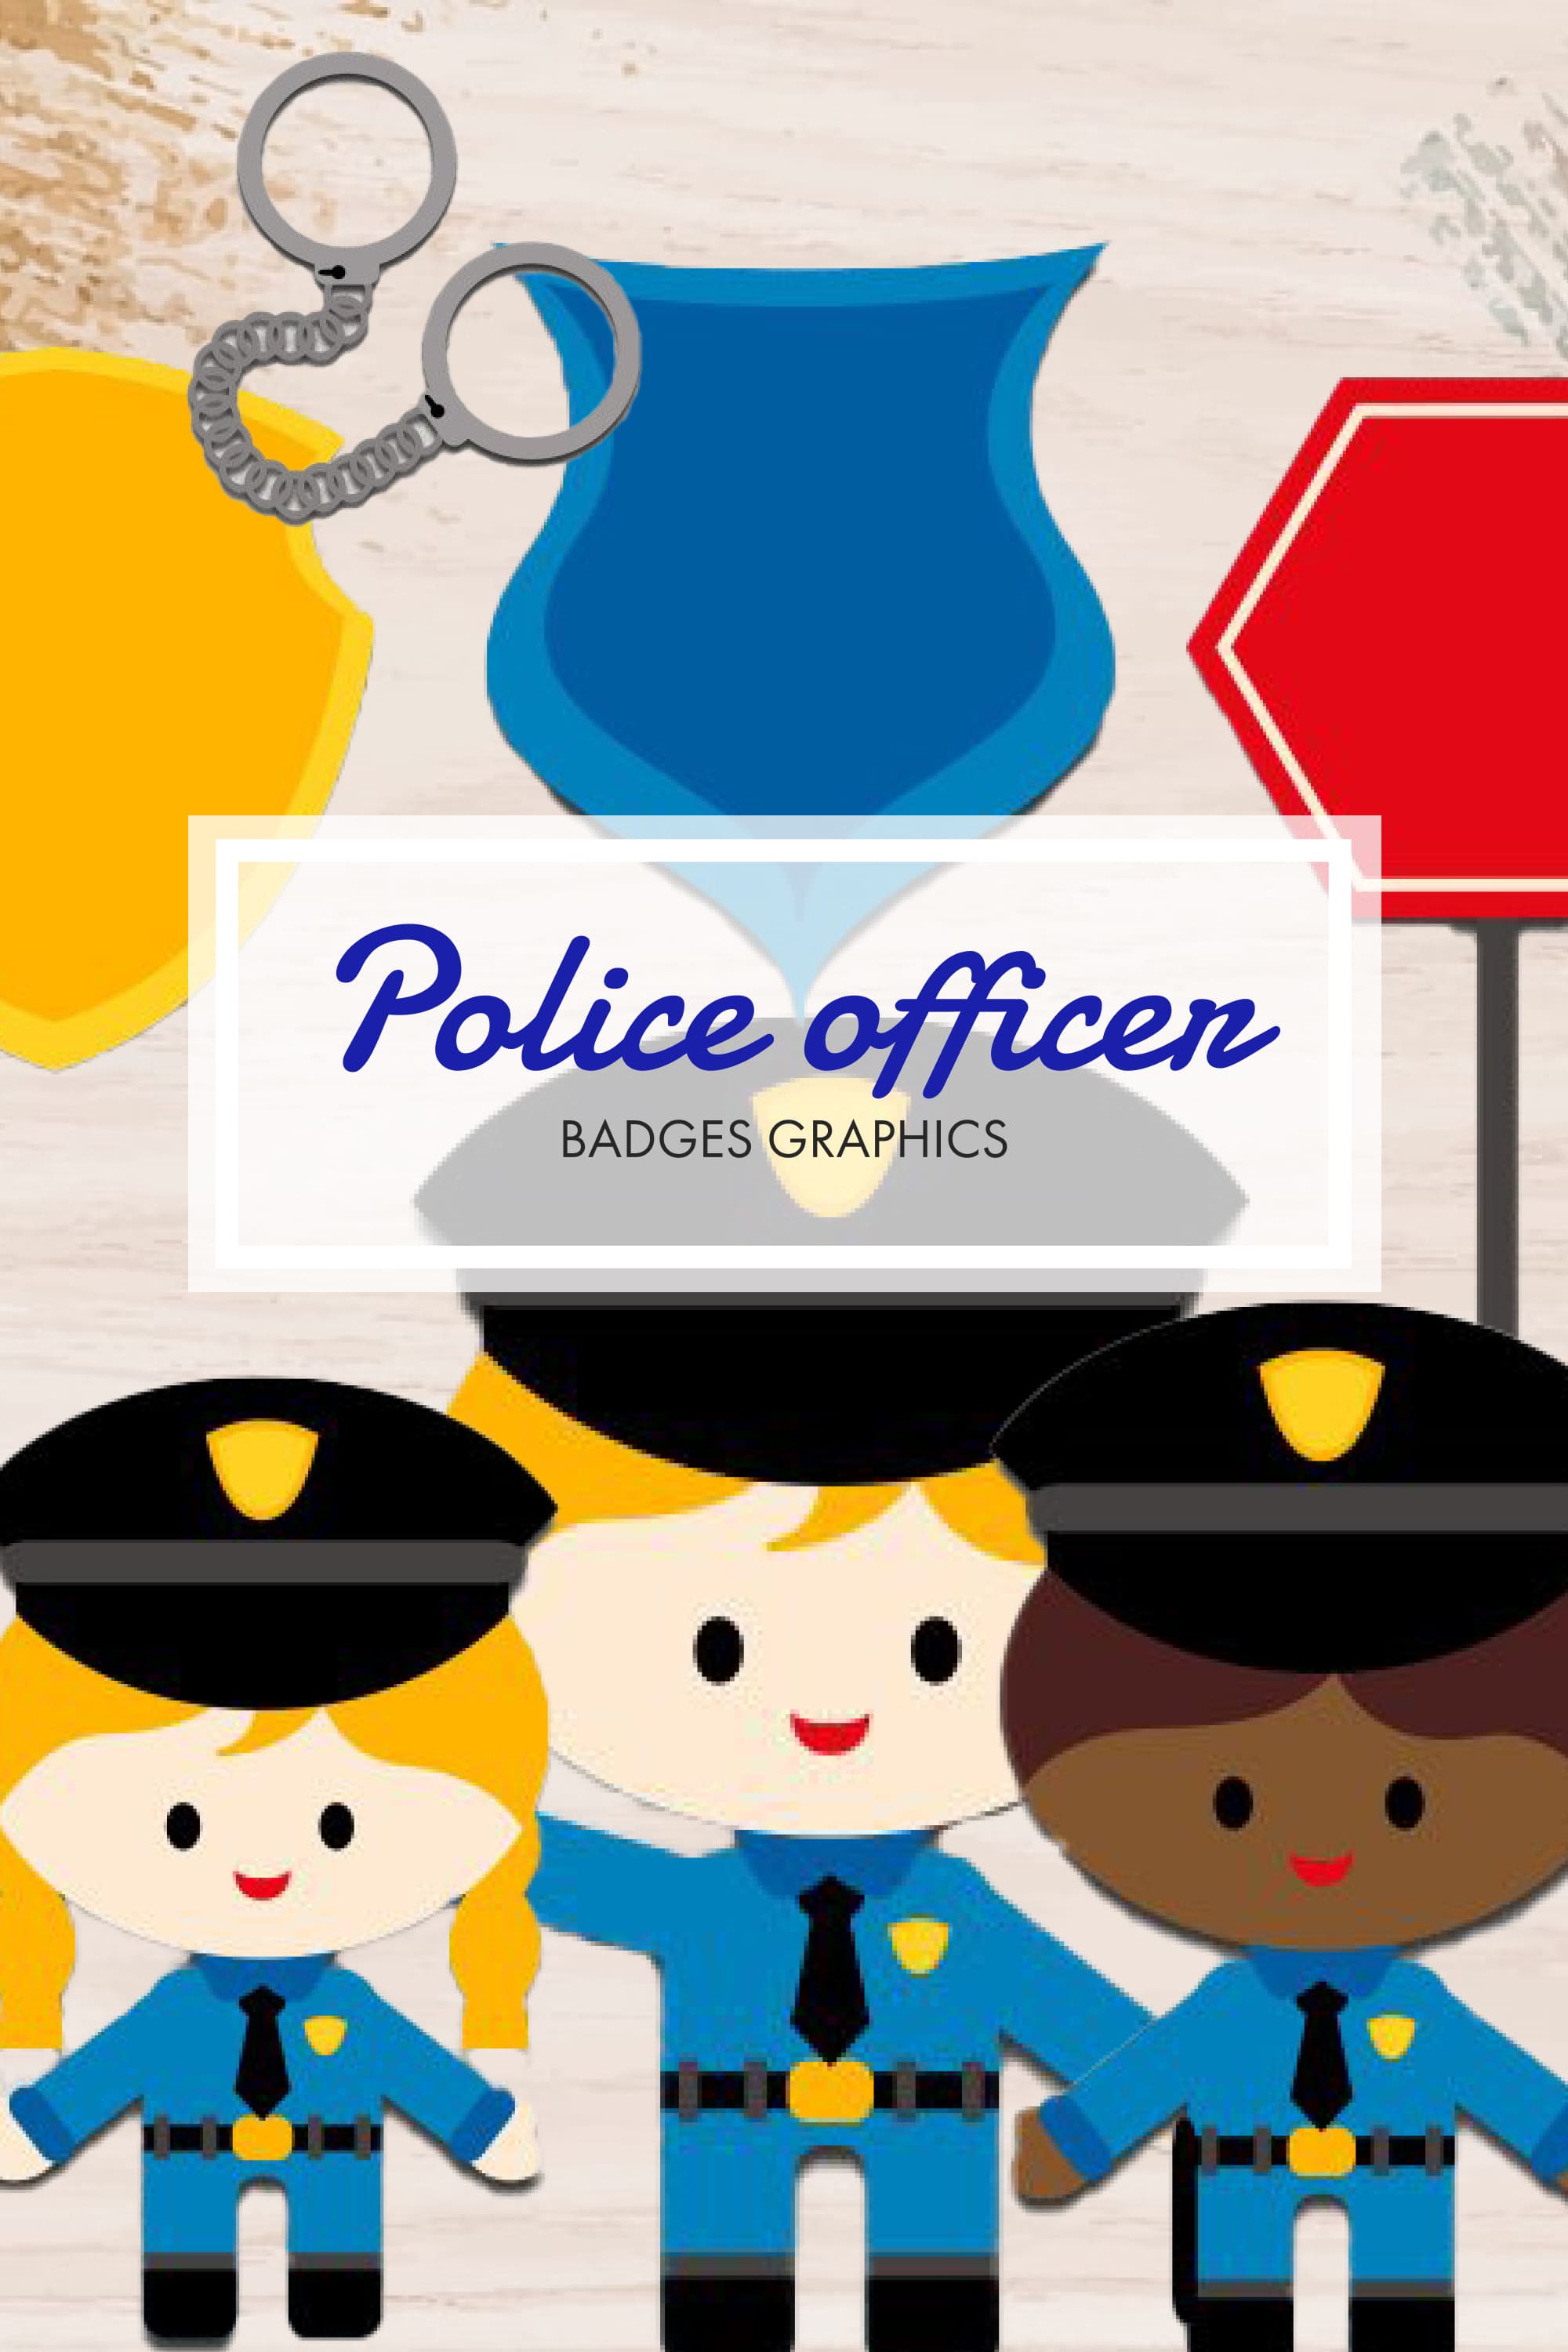 Police Officer - Policeman, Police Woman, Badges Graphics - Pinterest.